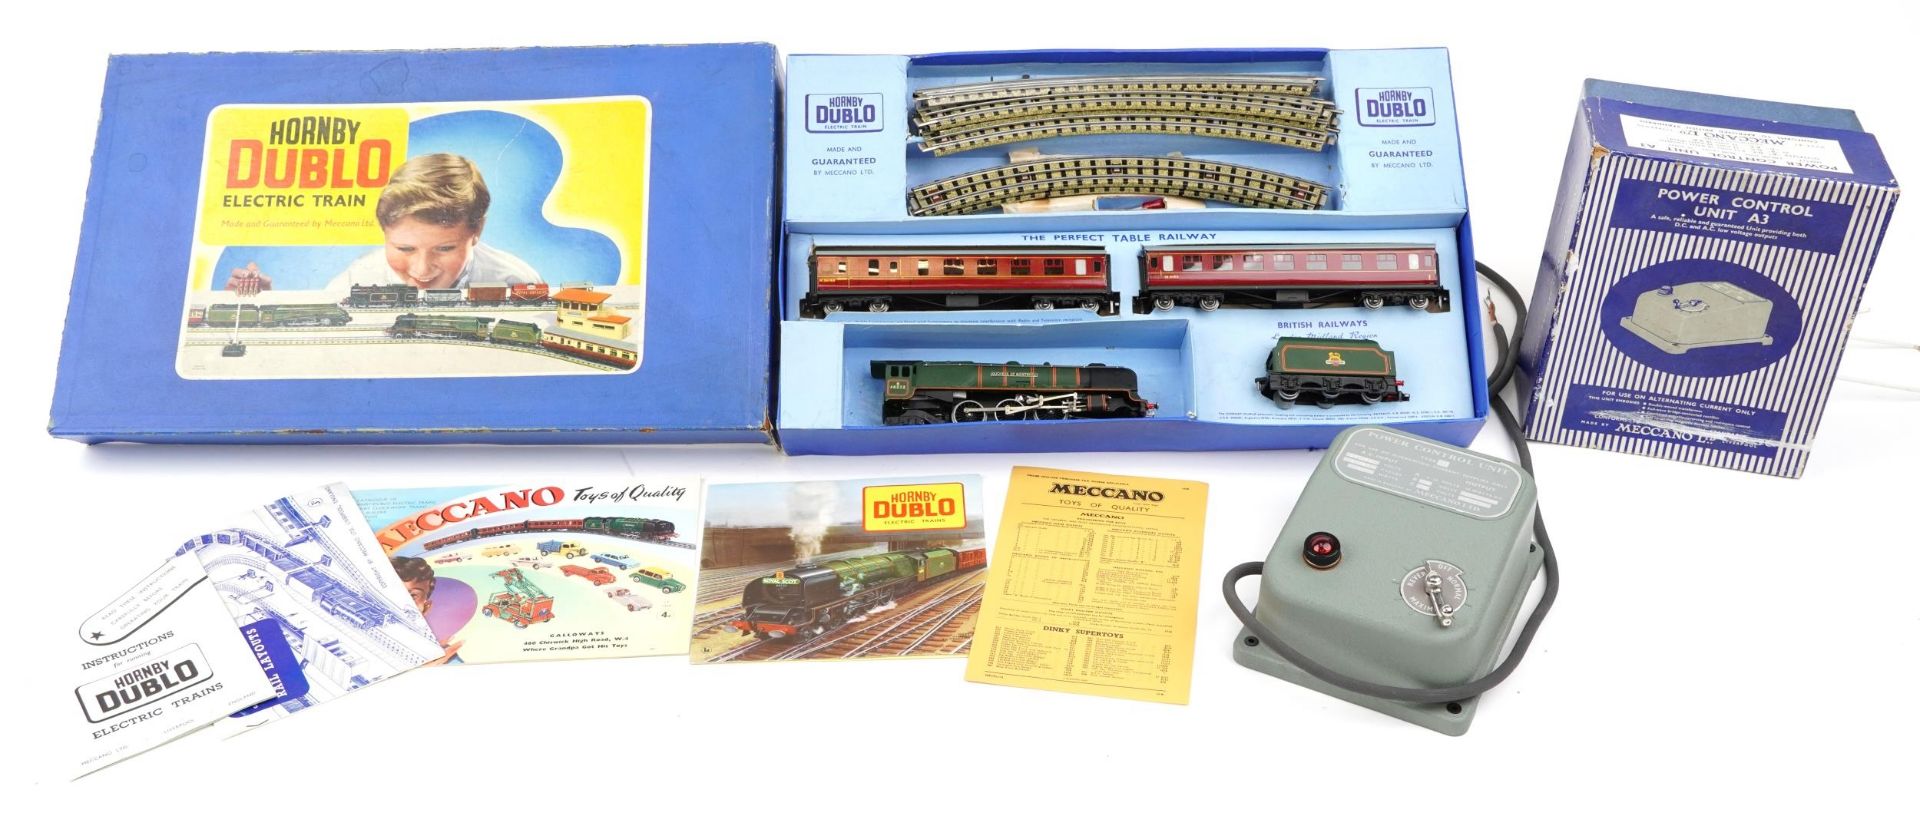 Vintage Hornby Dublo Duchess of Montrose passenger trainset with box and a Meccano A3 power